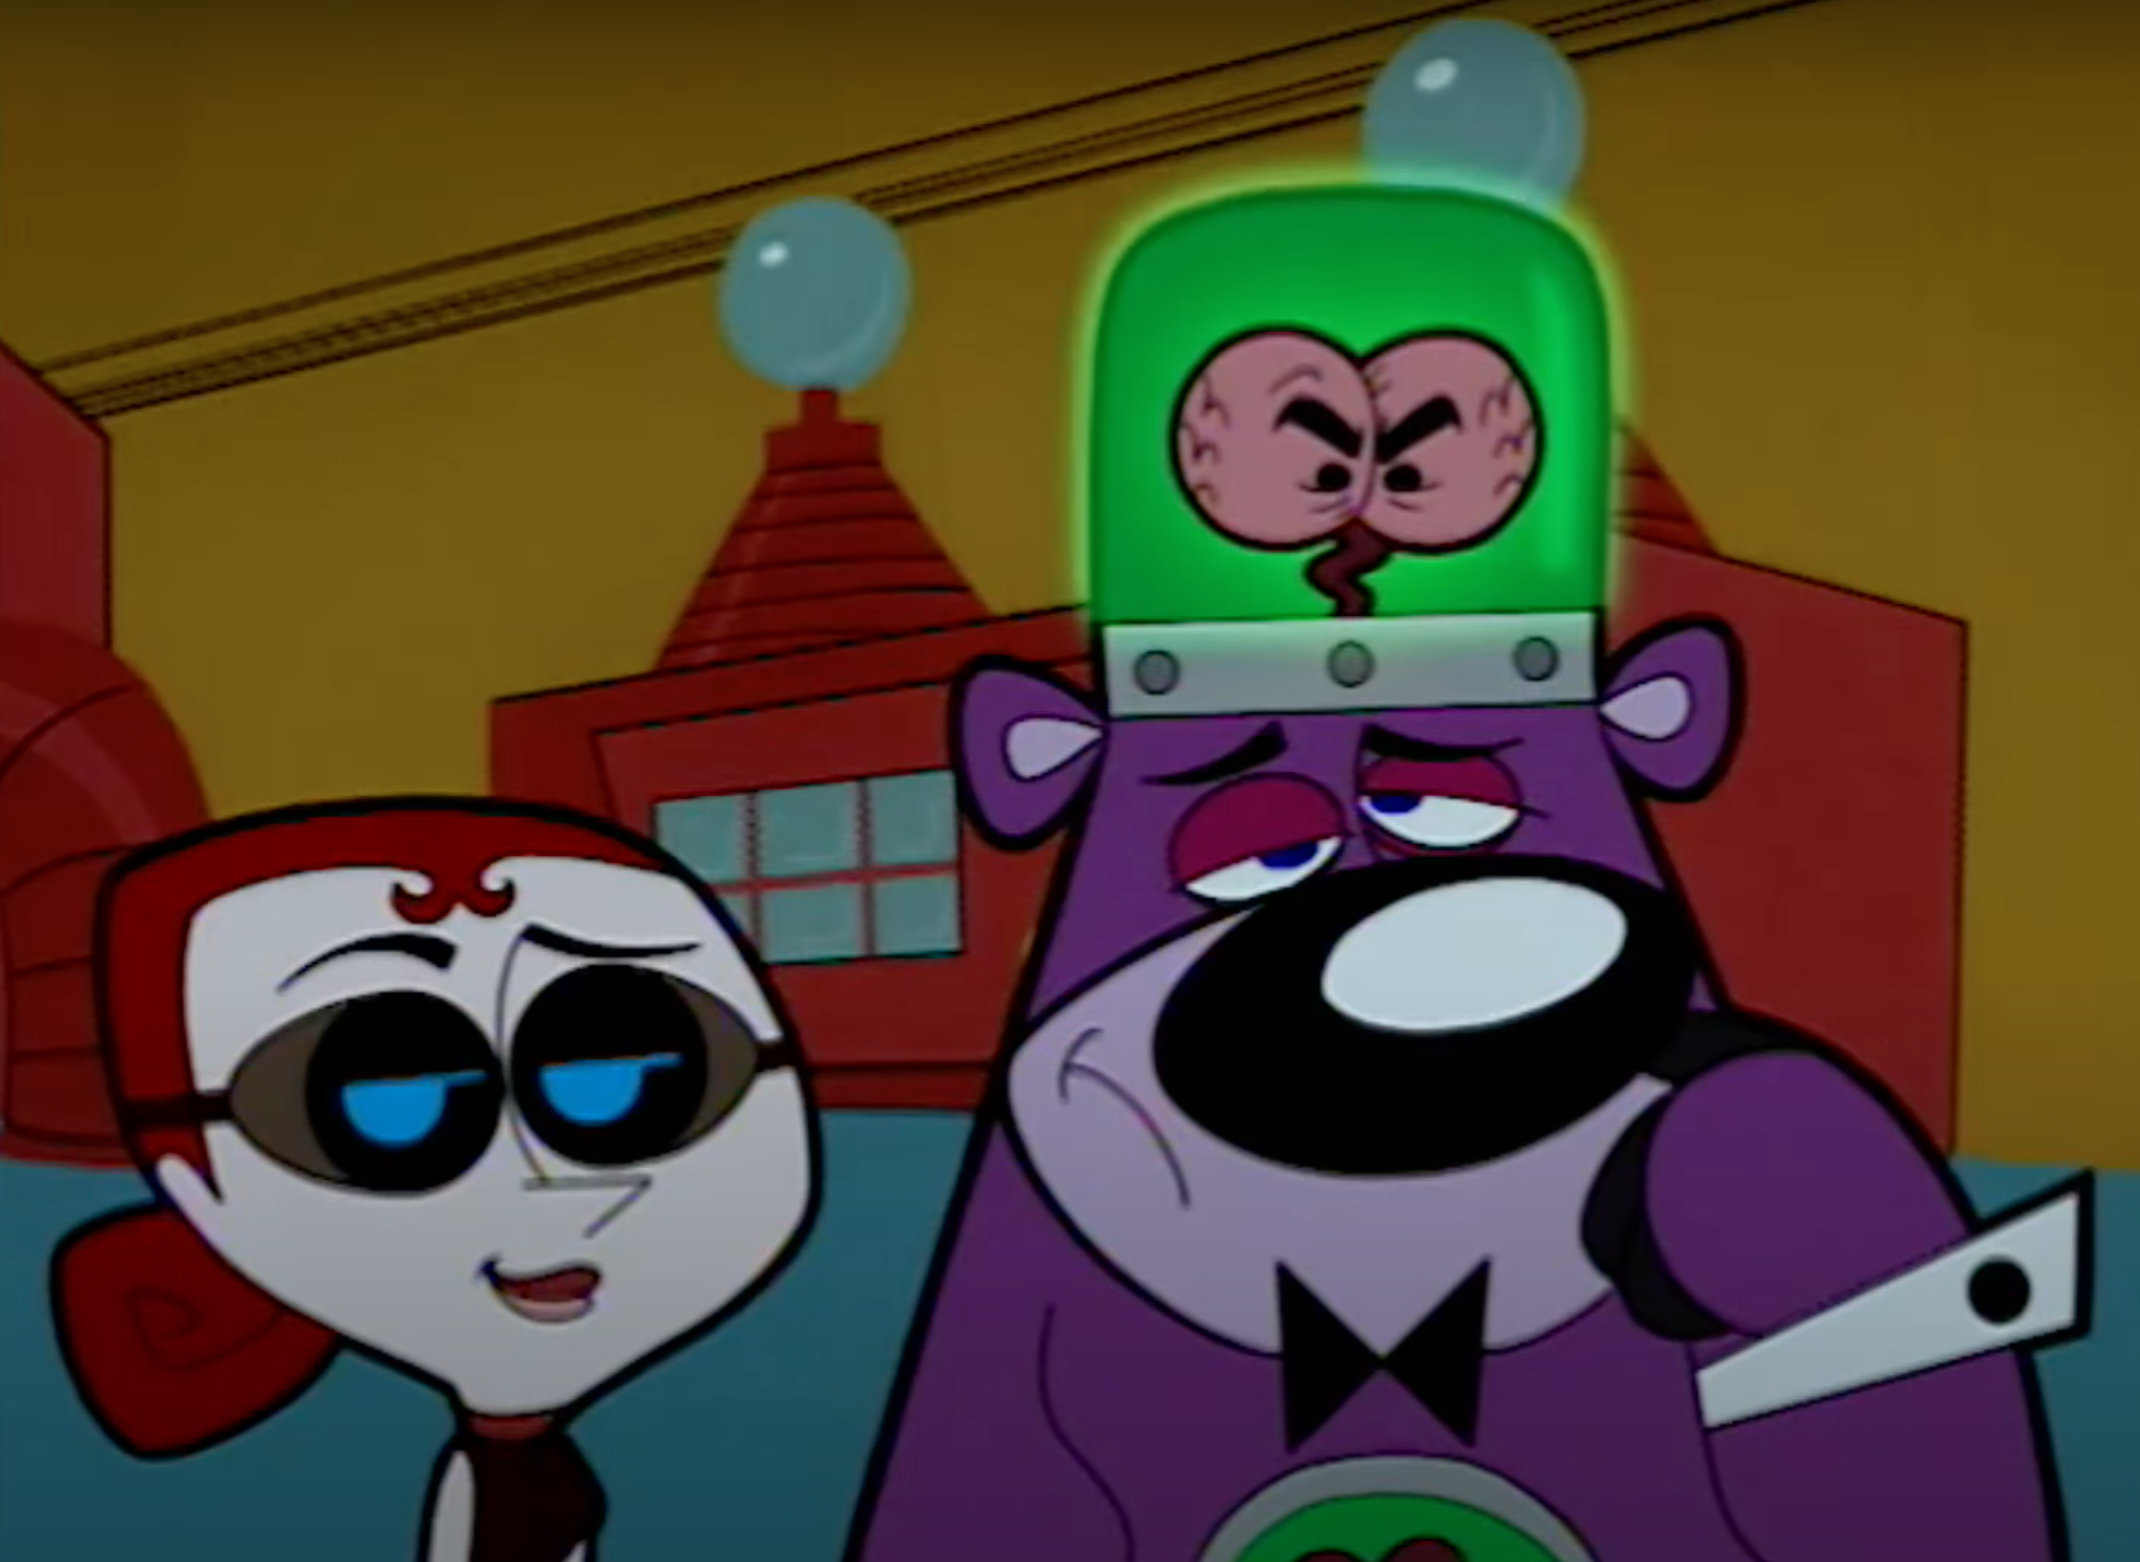 The 14 Best Old Cartoon Network Shows